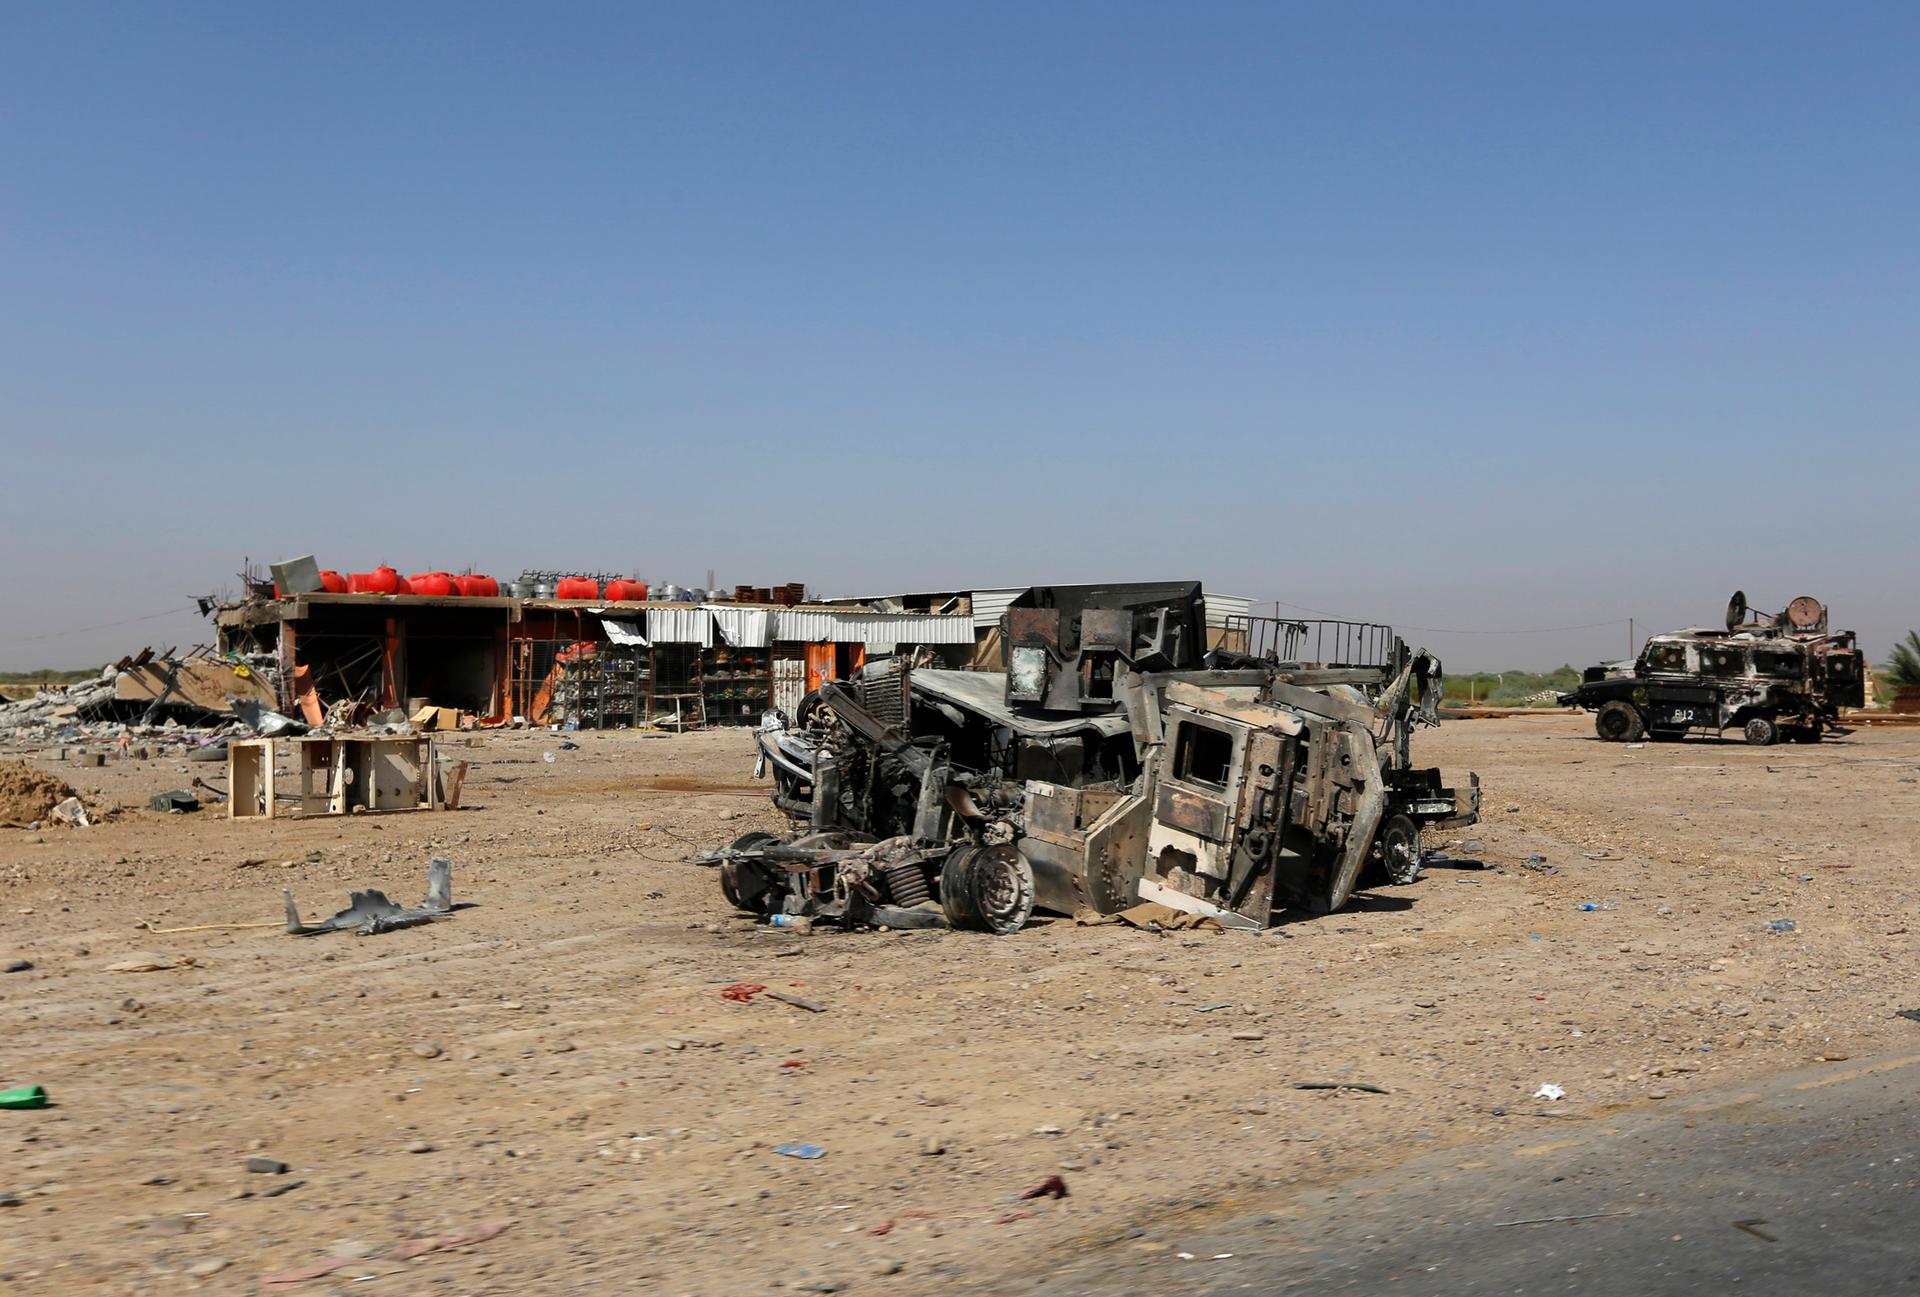 Burnt vehicles belonging to the Iraqi security forces are seen on a road leading to Samarra at Salahuddin province July 12, 2014.